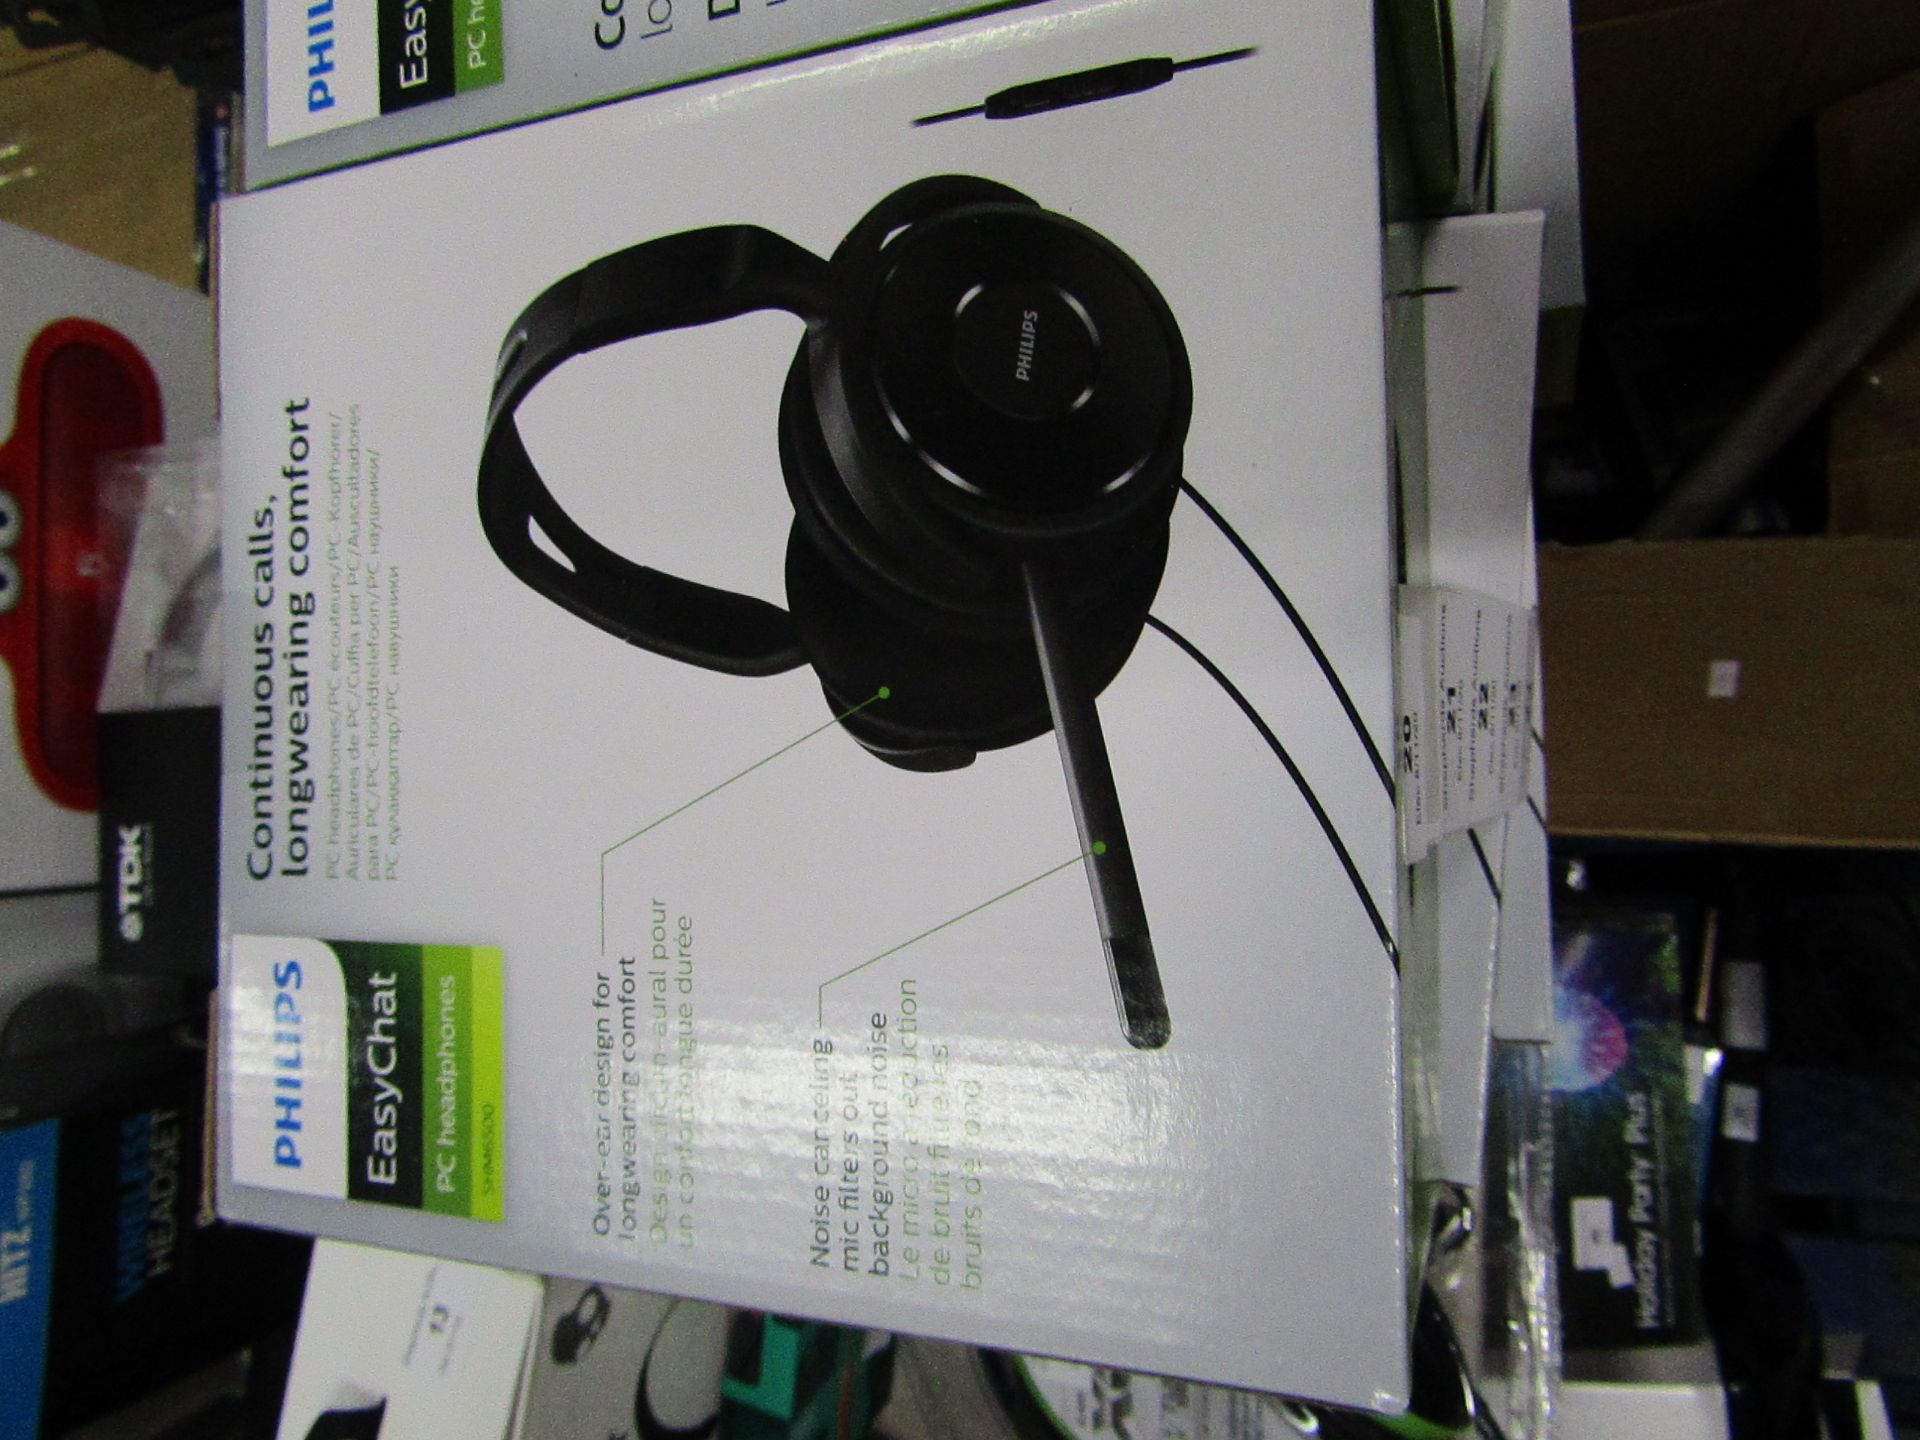 Phillips Easy Chat PC headphones, new and boxed